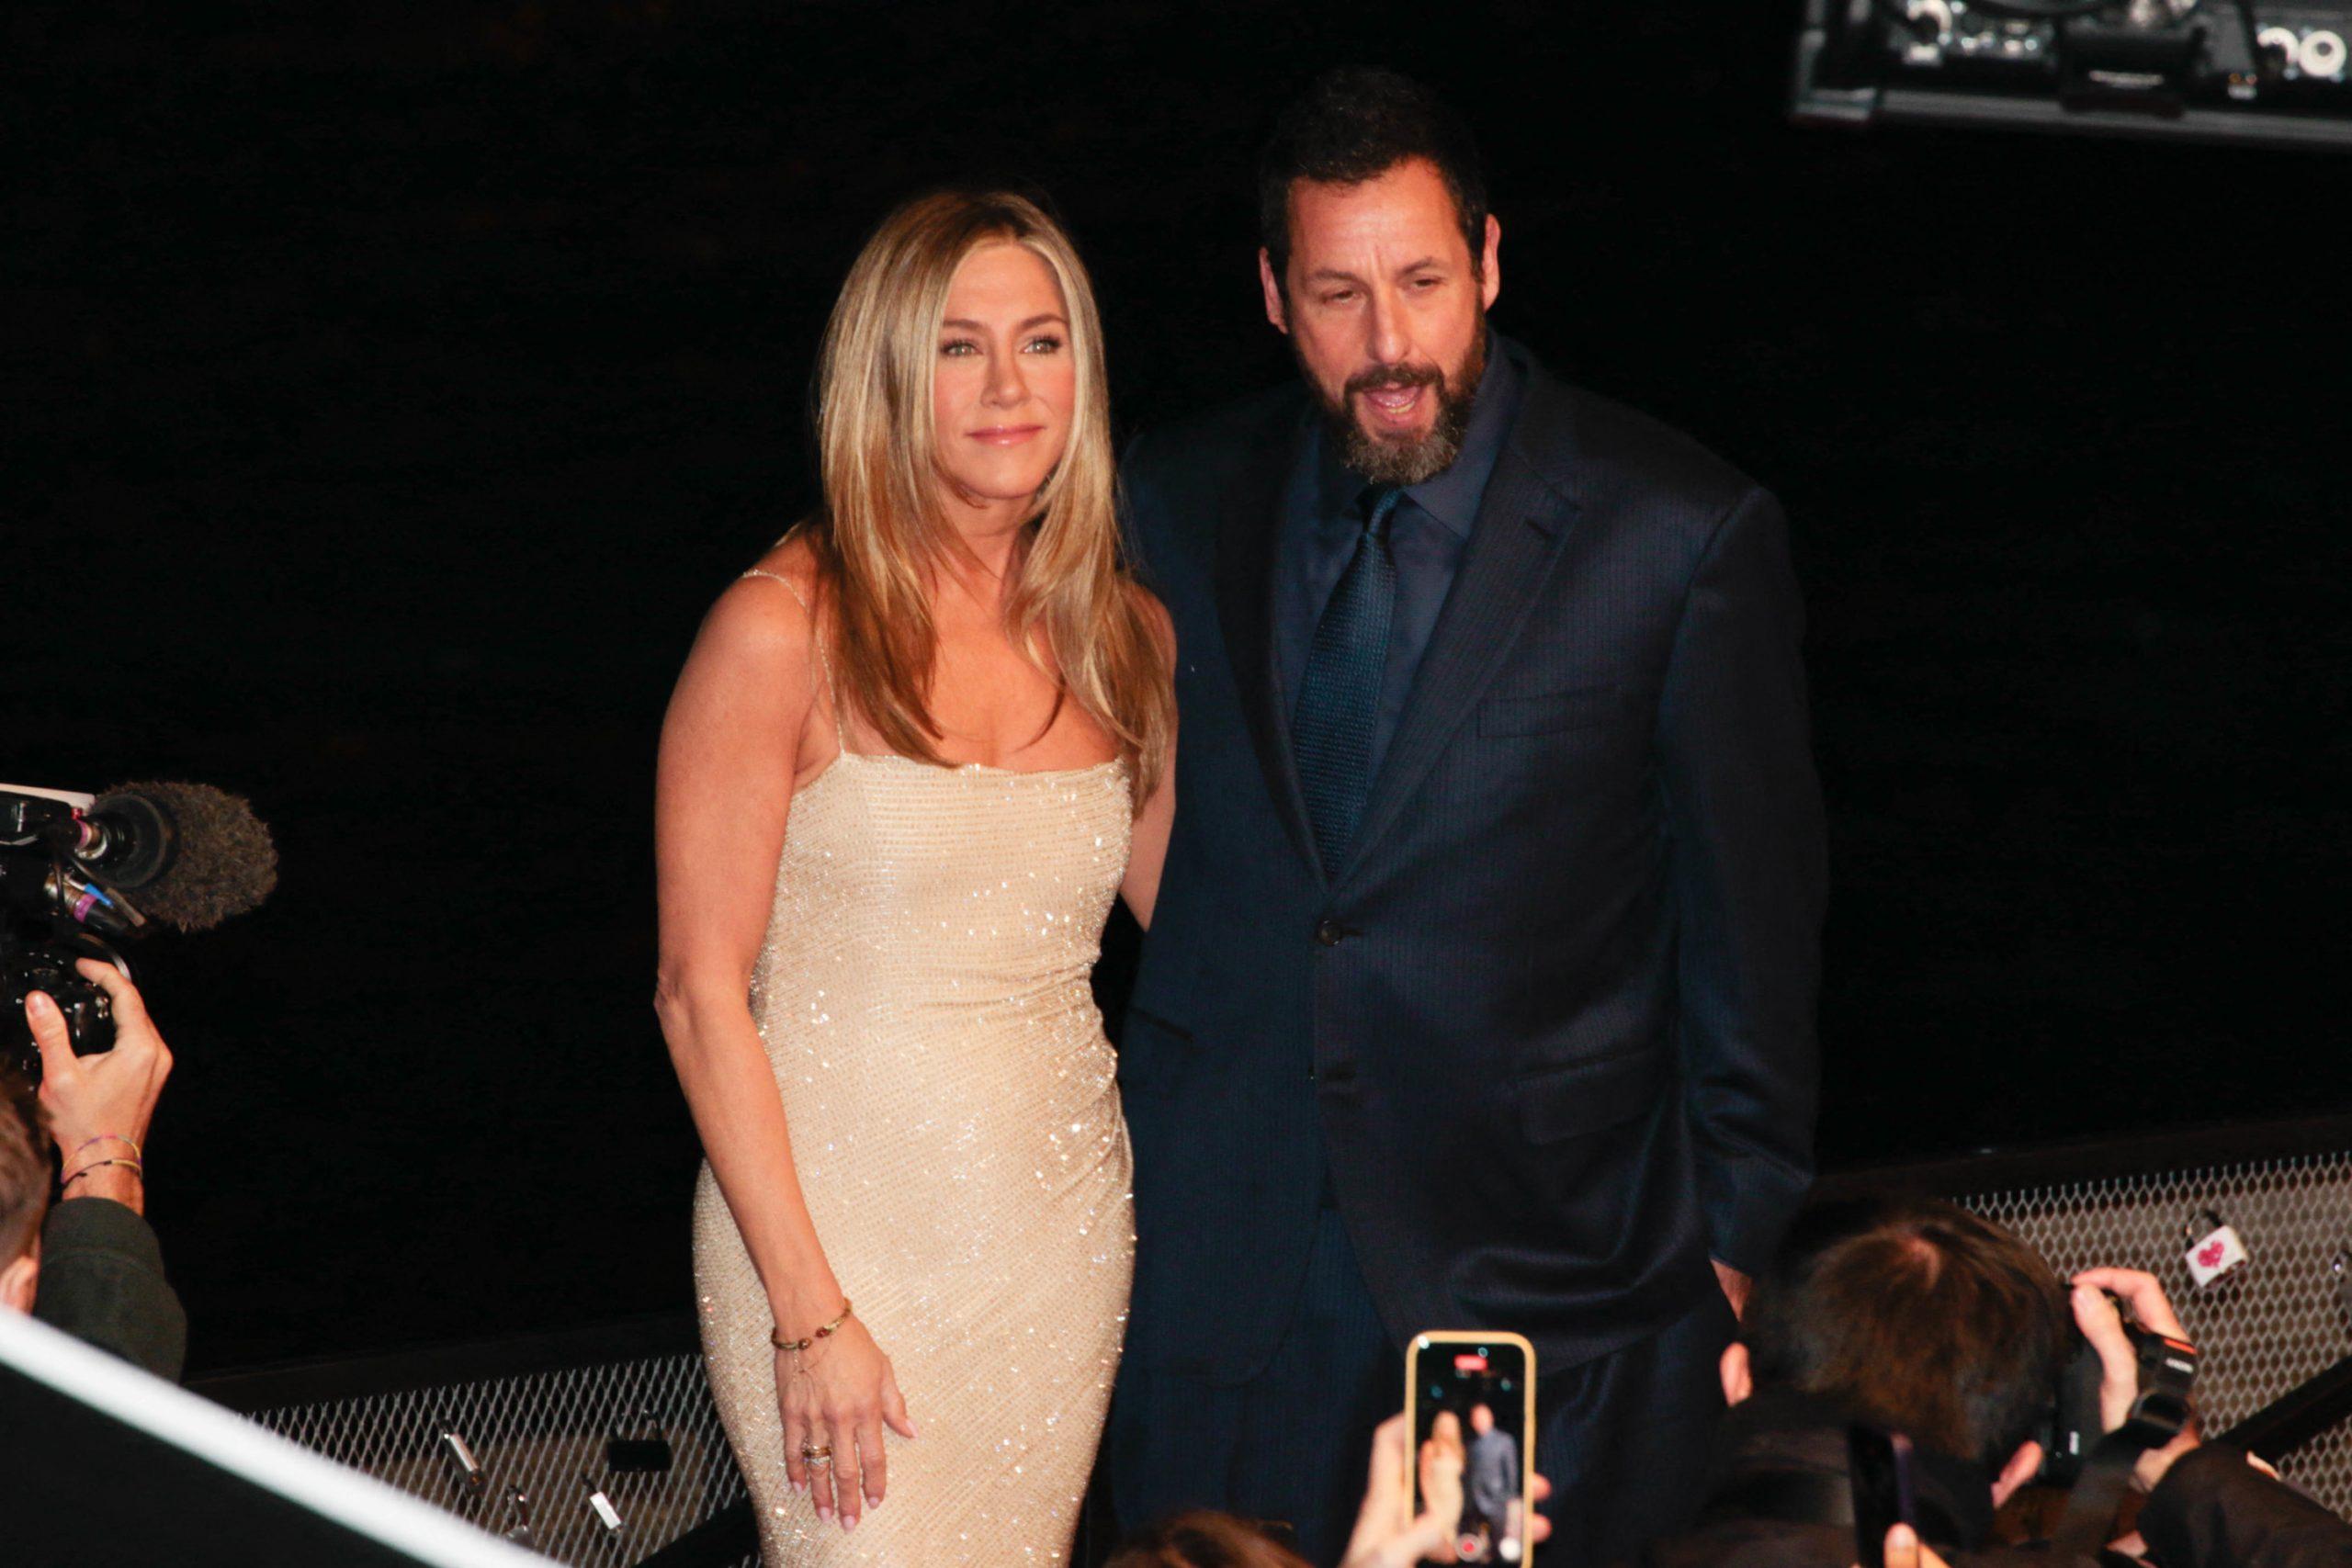 Jennifer Aniston and Adam Sandler arriving at the red carpet of Mystery Murder 2 in Paris